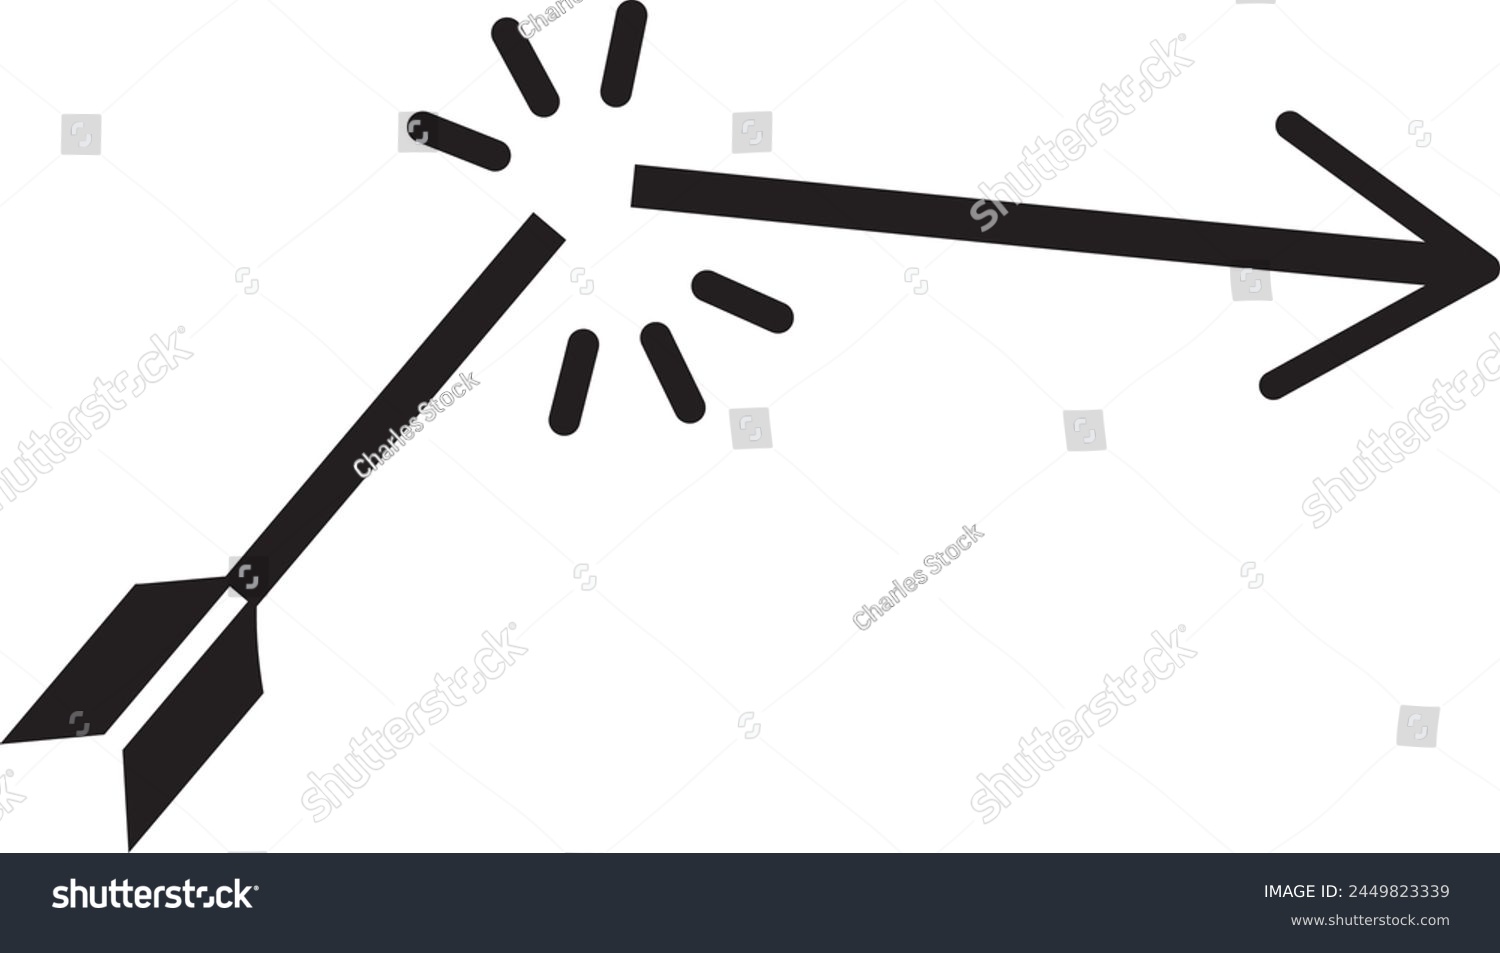 SVG of Broken Arrow icon vector. Can be used for Archery. illustration with flat style svg